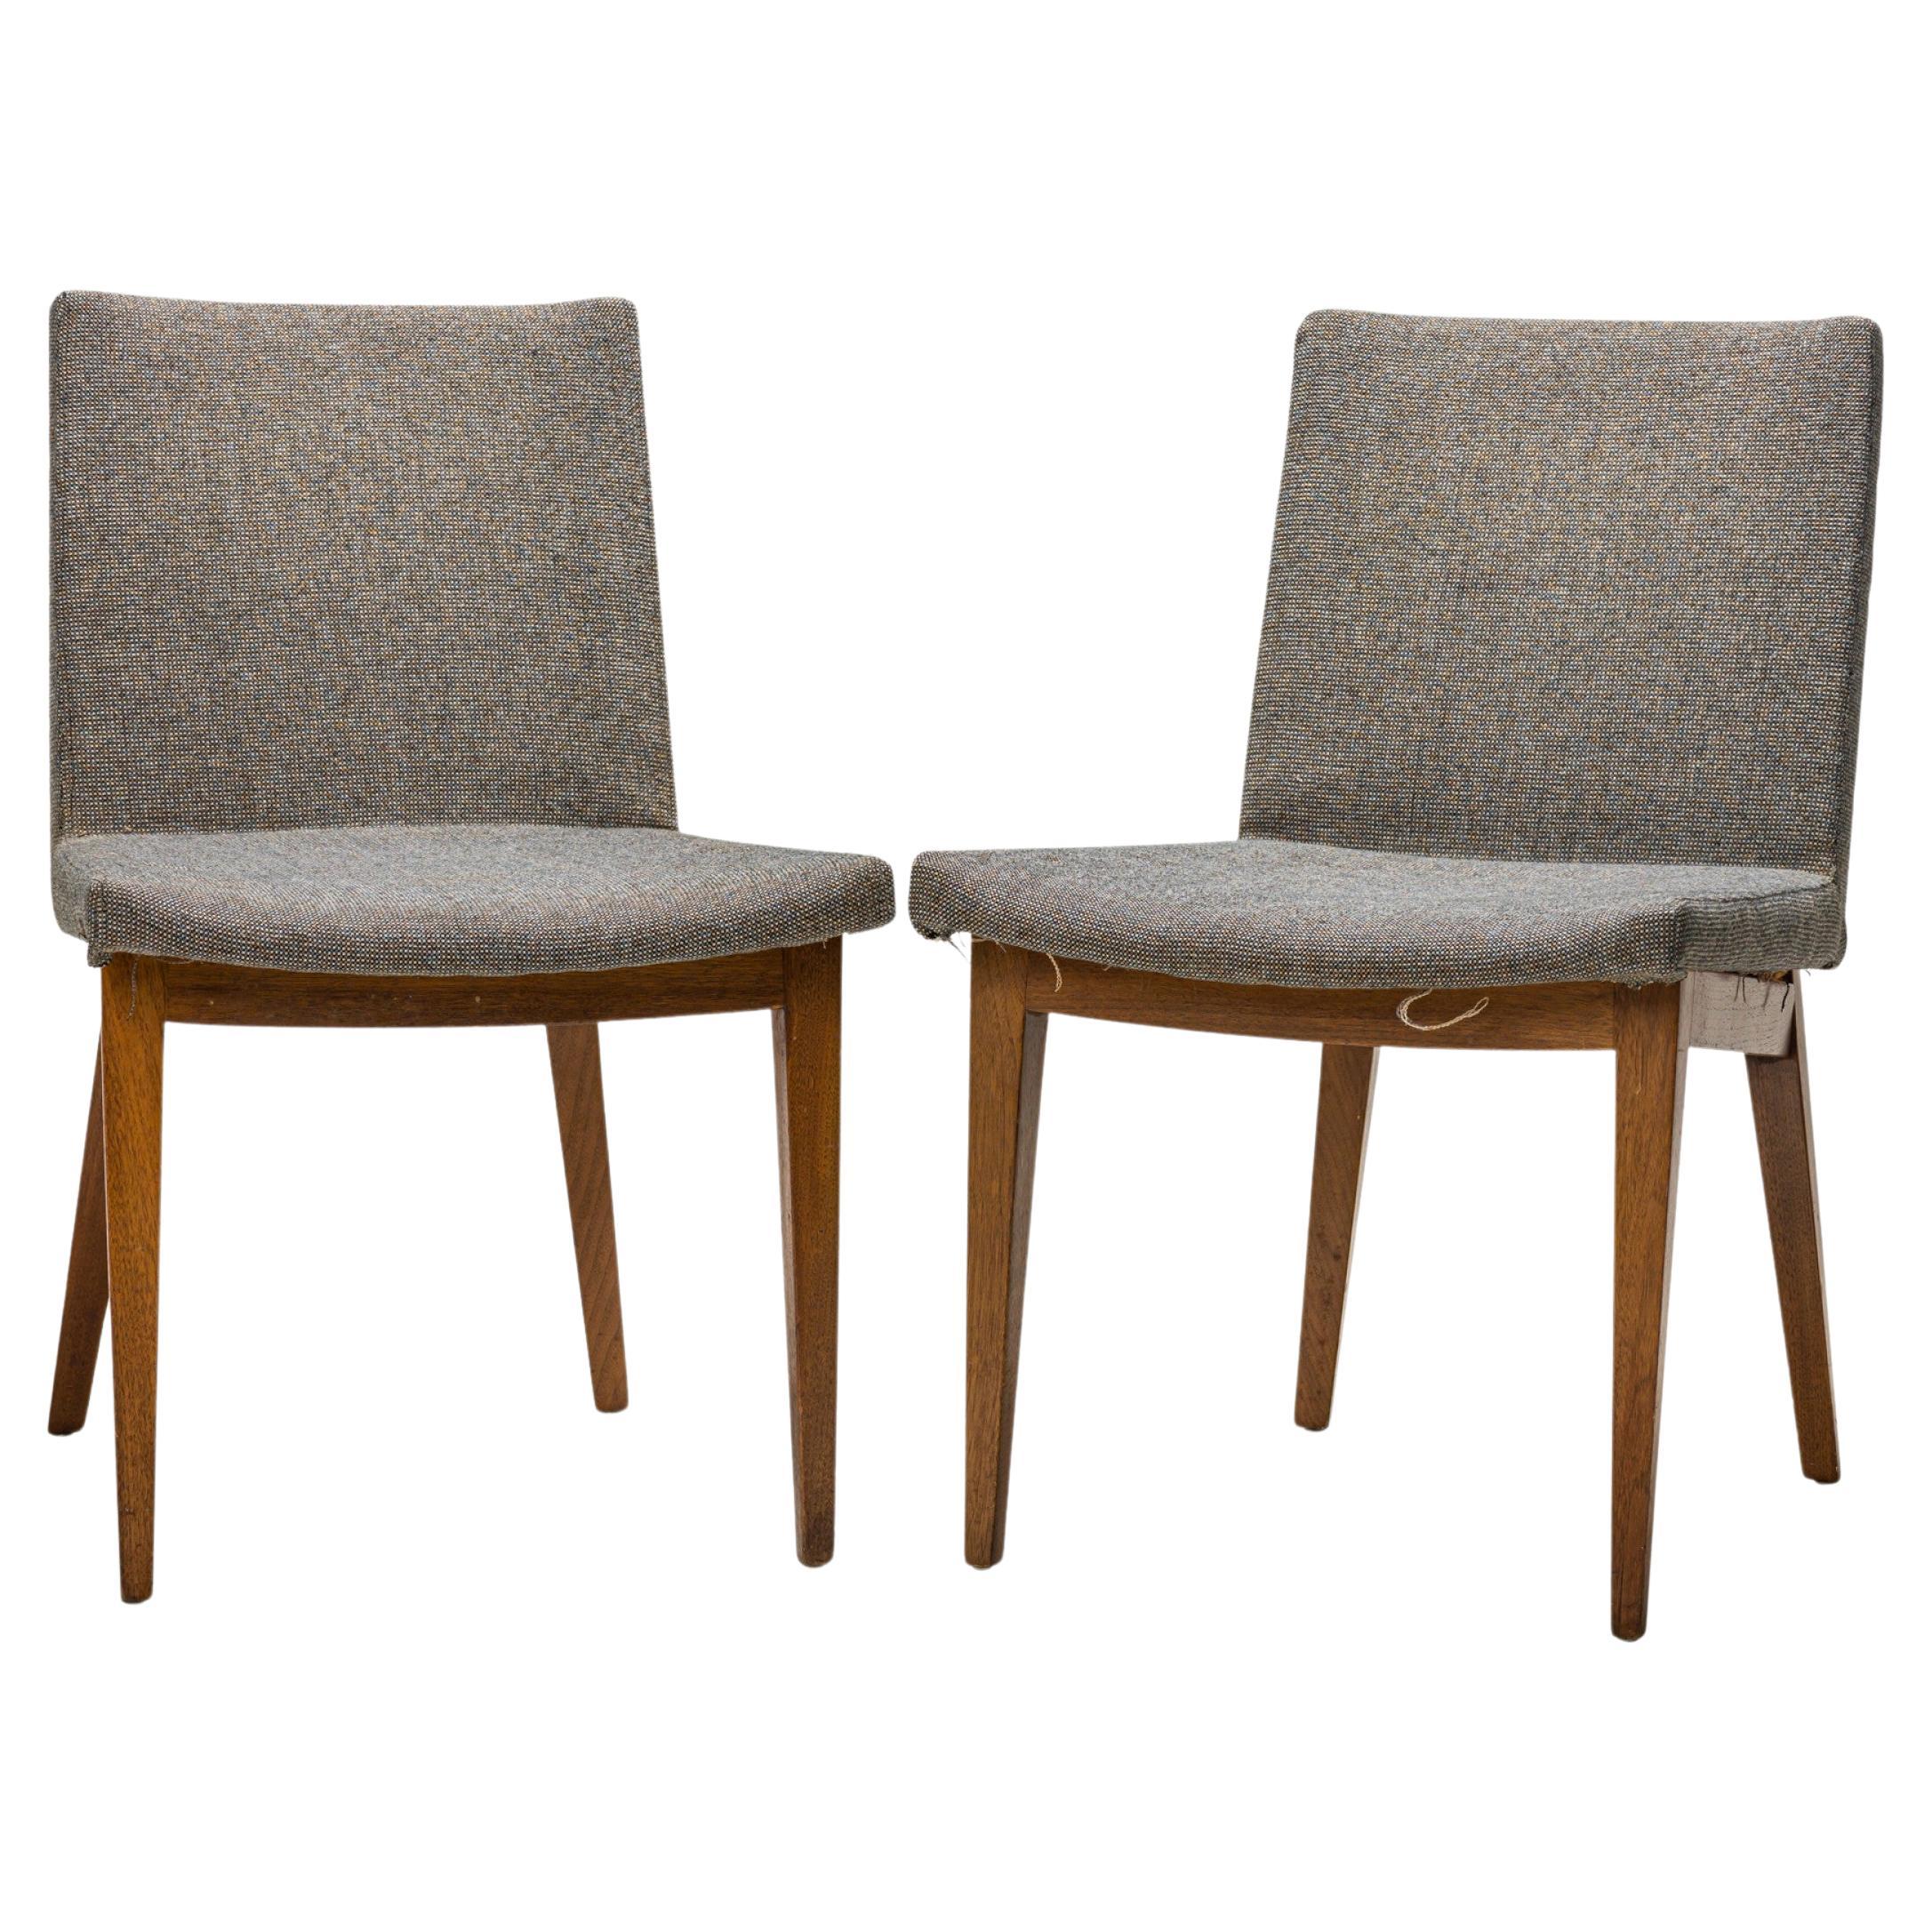 Set of 6 Edward J Wormley Gray Fabric Upholstered Dining Side Chairs For Sale